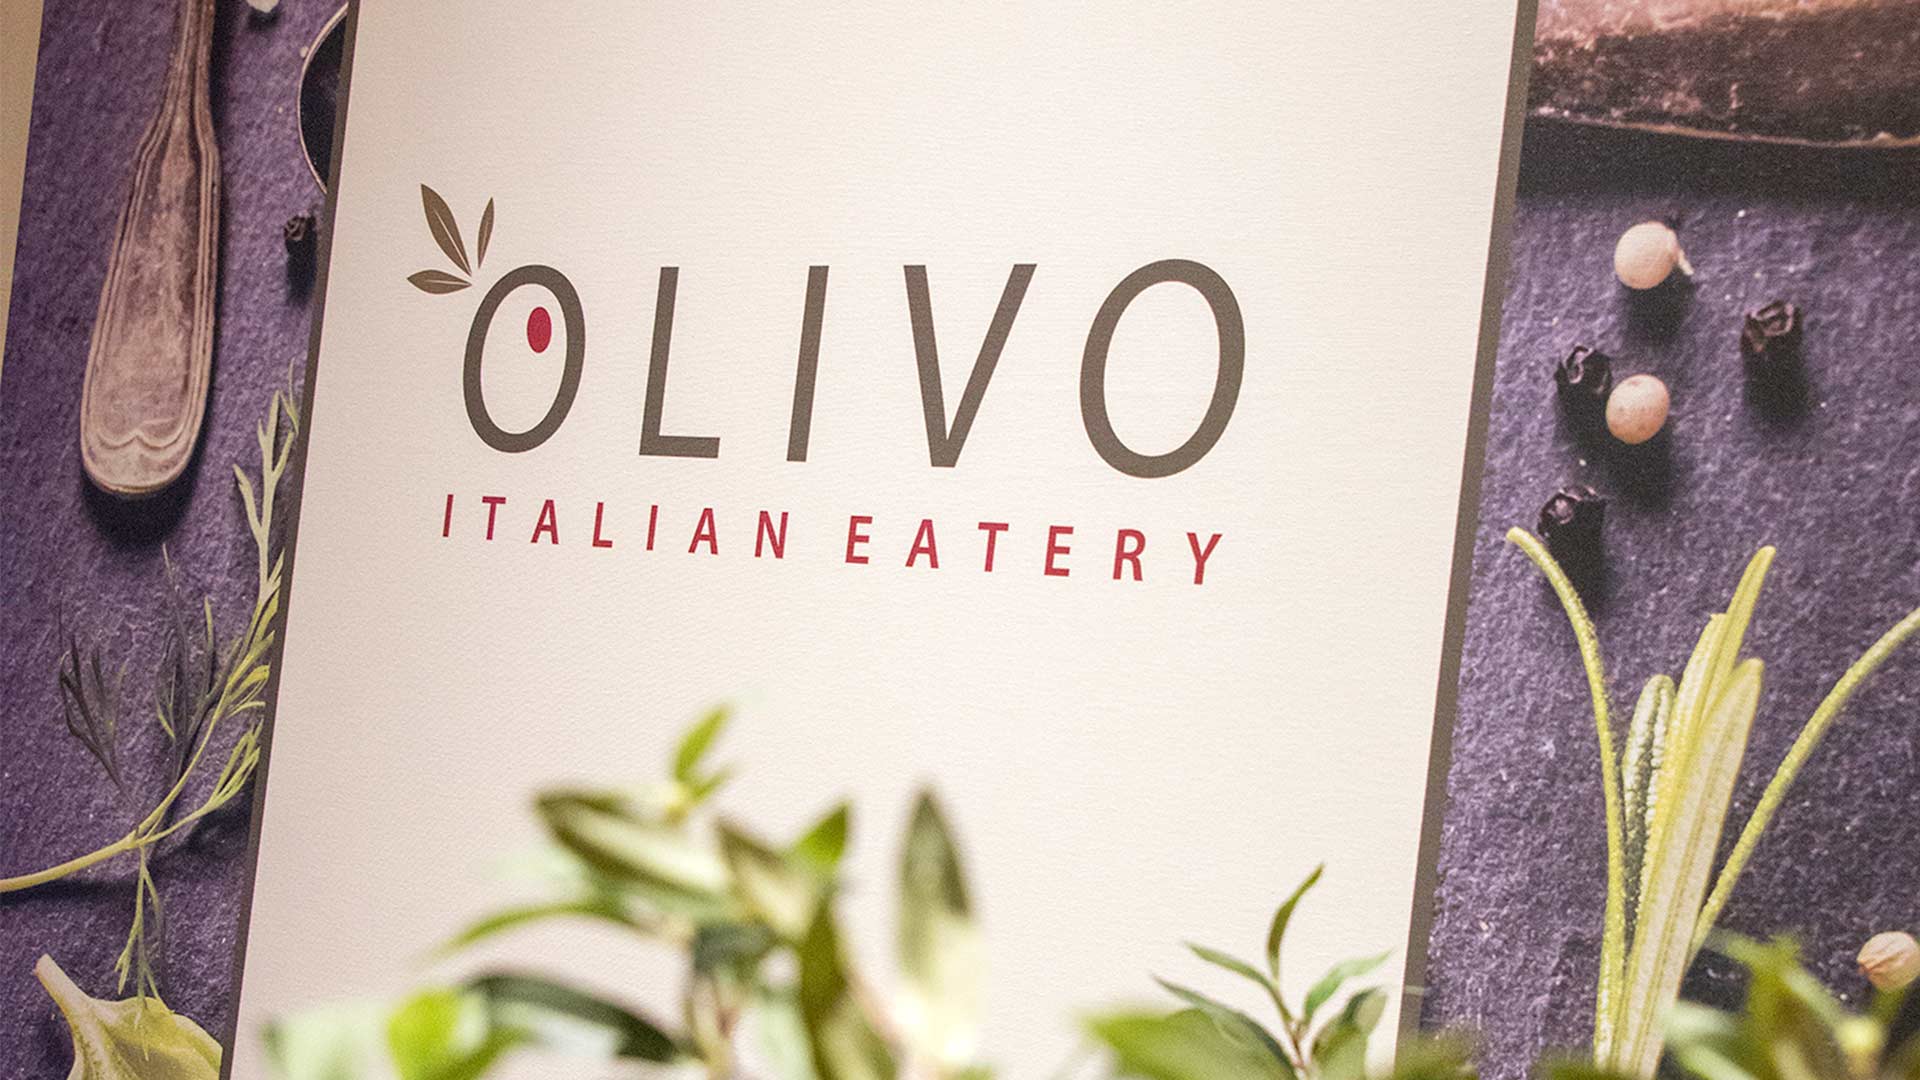 Sign depicting Olivo Italian Eatery, a restaurant in Cork